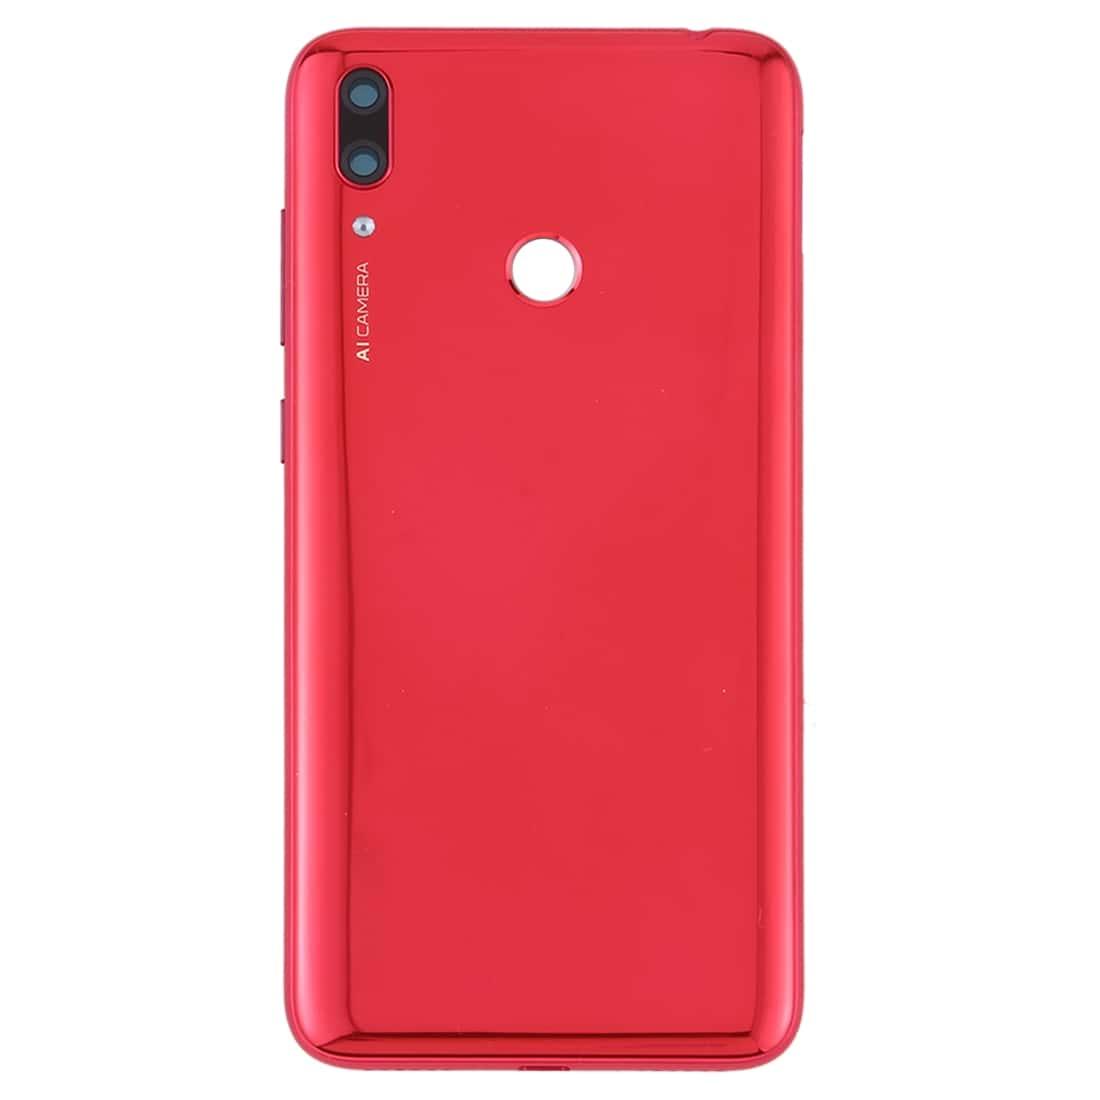 Back Panel Housing Body for Huawei Y7 Prime 2019 Red with Camera Lens